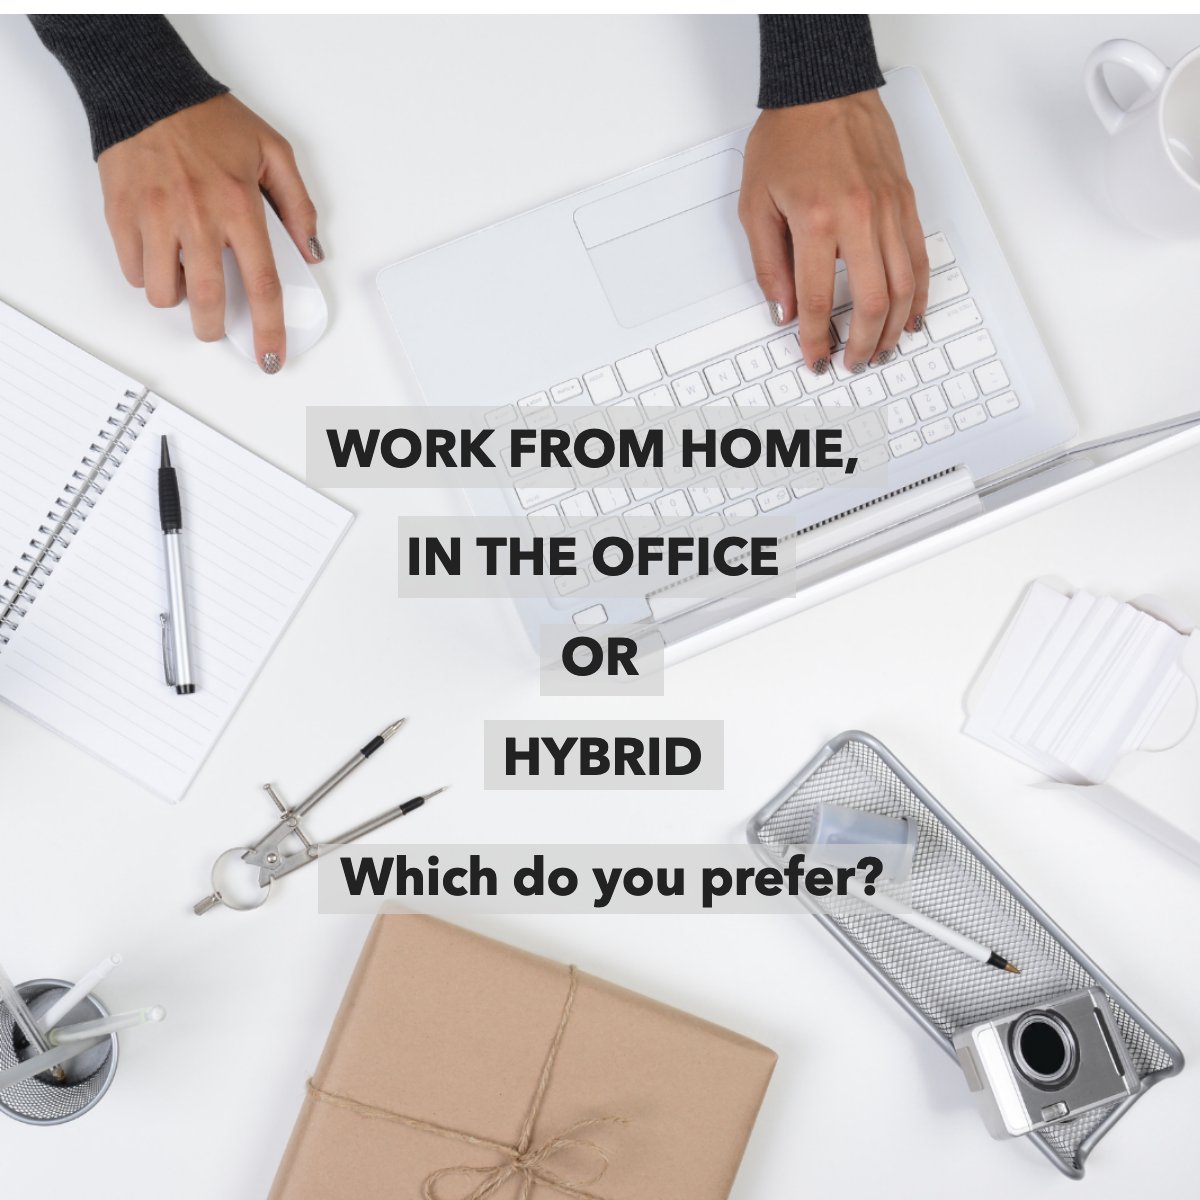 Do you have a dedicated working space? 💻 Tell us in the comments! 💭 #question #workspace #worklife #homeoffice #hybridwork #cherylcitro